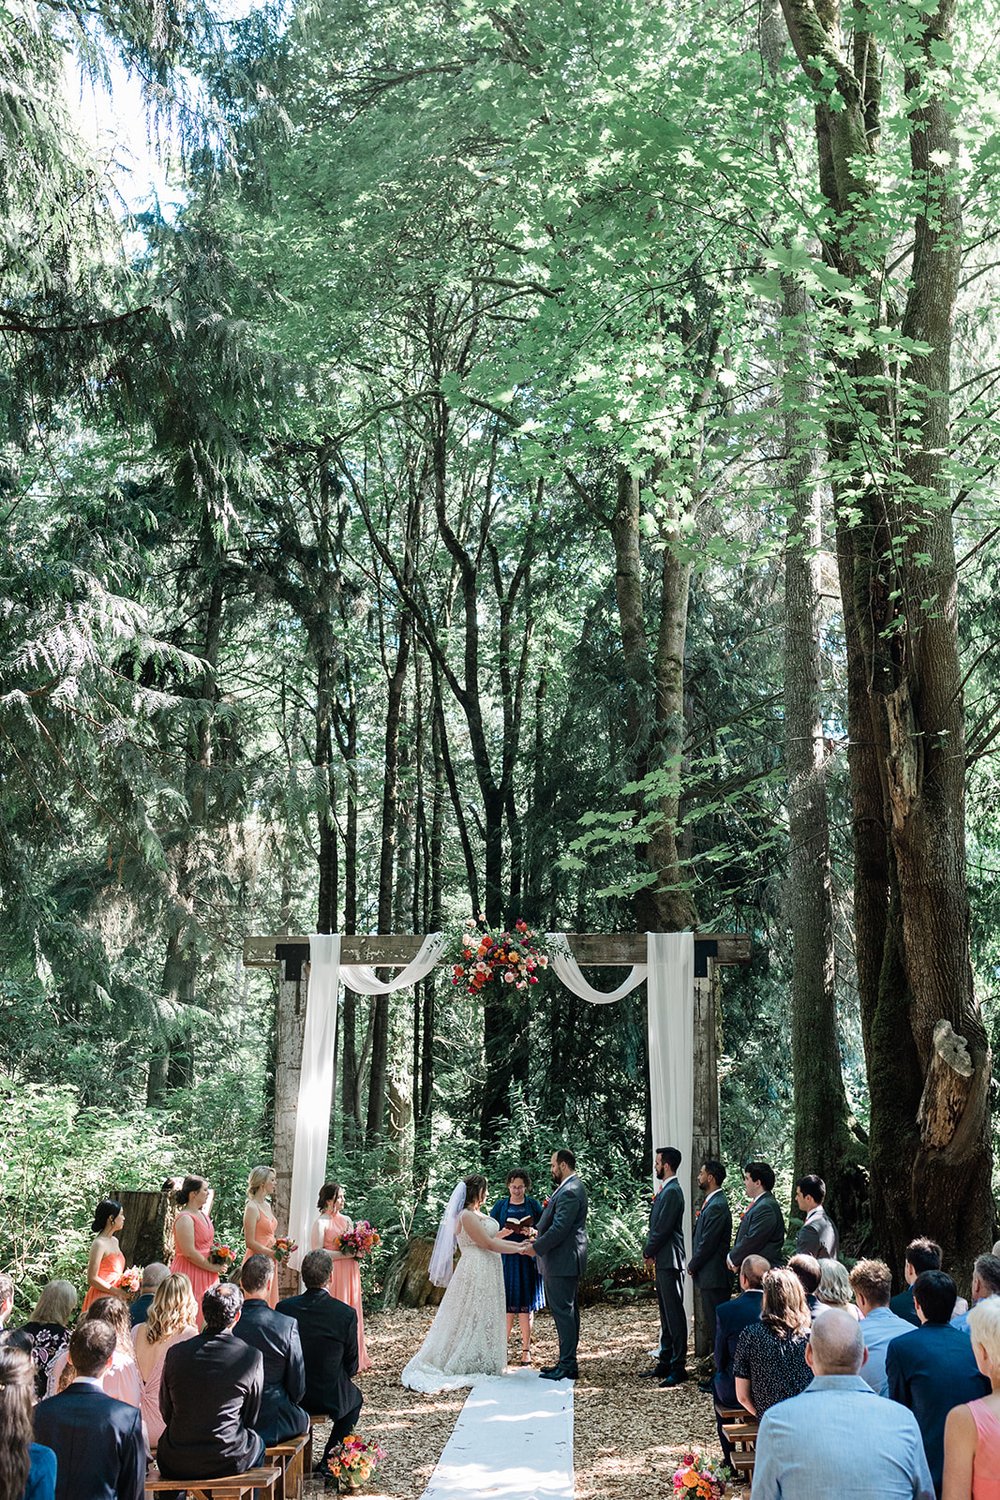 Outdoor Wedding in the Woods at Twin Willow Gardens